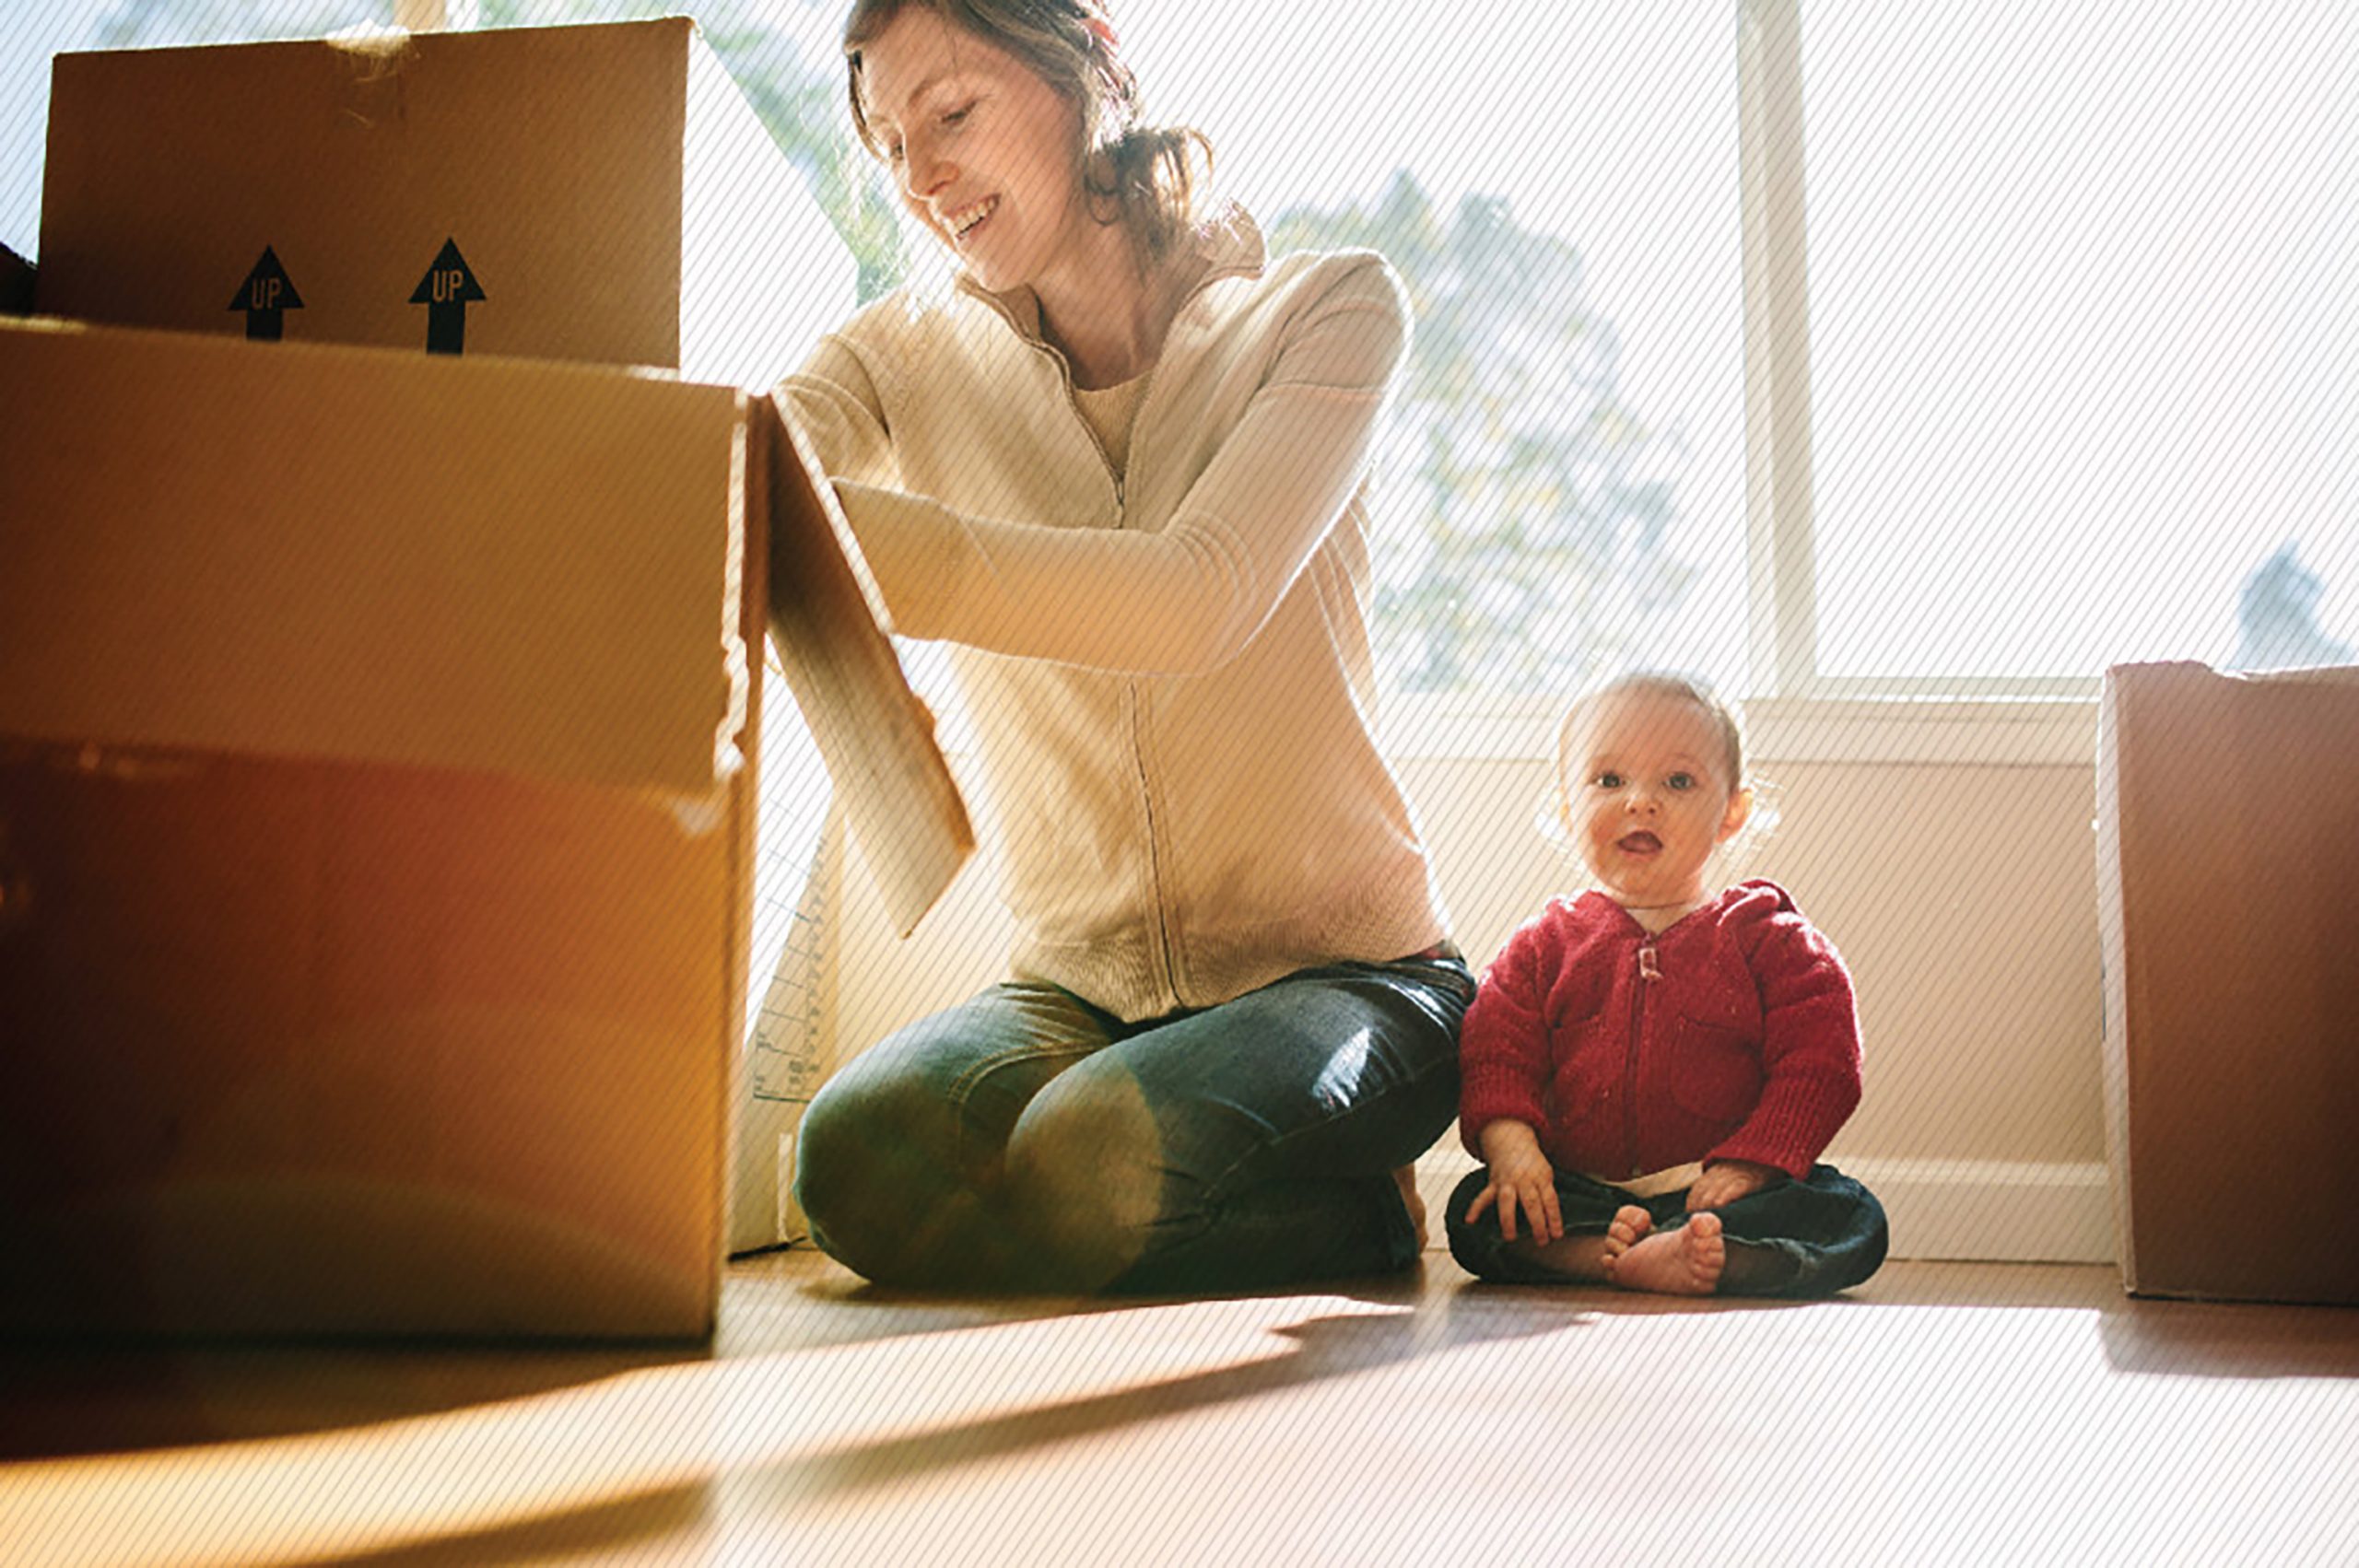 Featured image: A mom unpacking boxes with her toddler sitting next to her - Read full post: Life Events: Serving Customers When and How It Matters Most